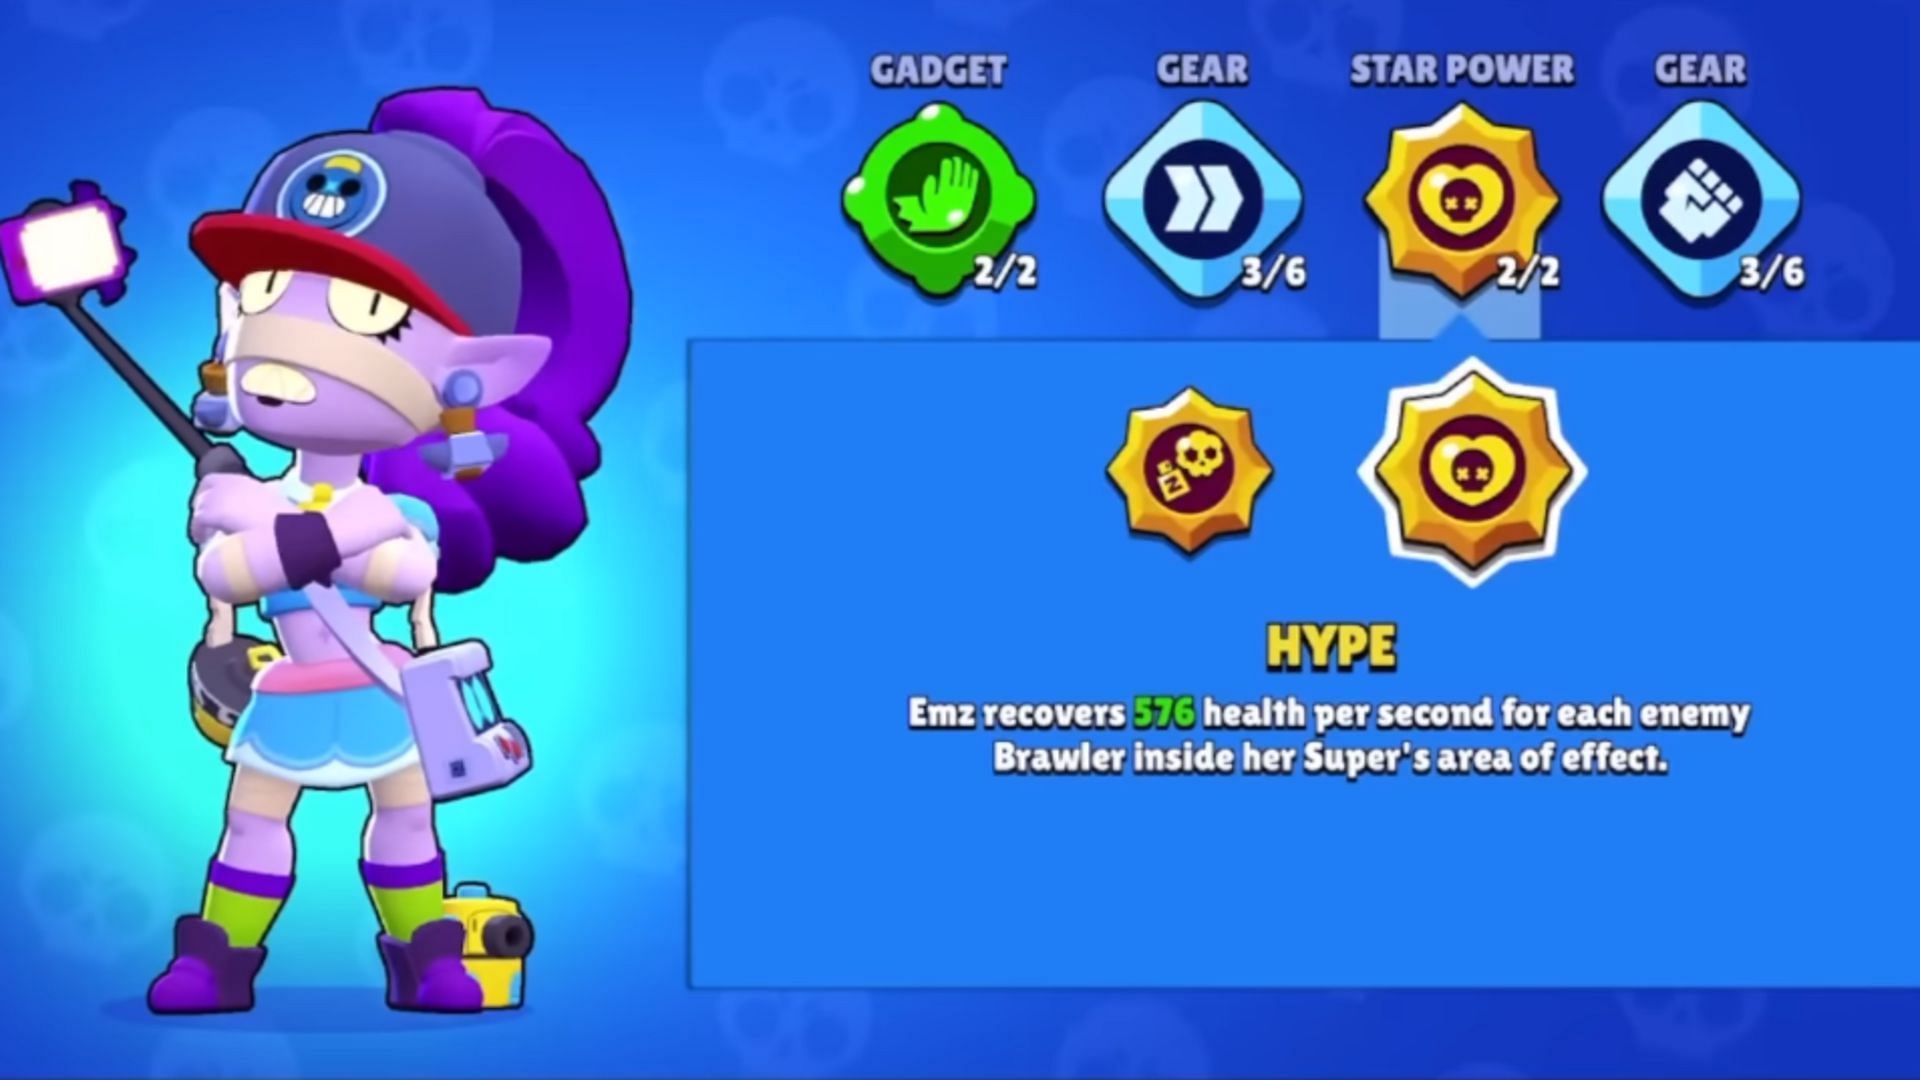 Hype Star Power (Image via Supercell)